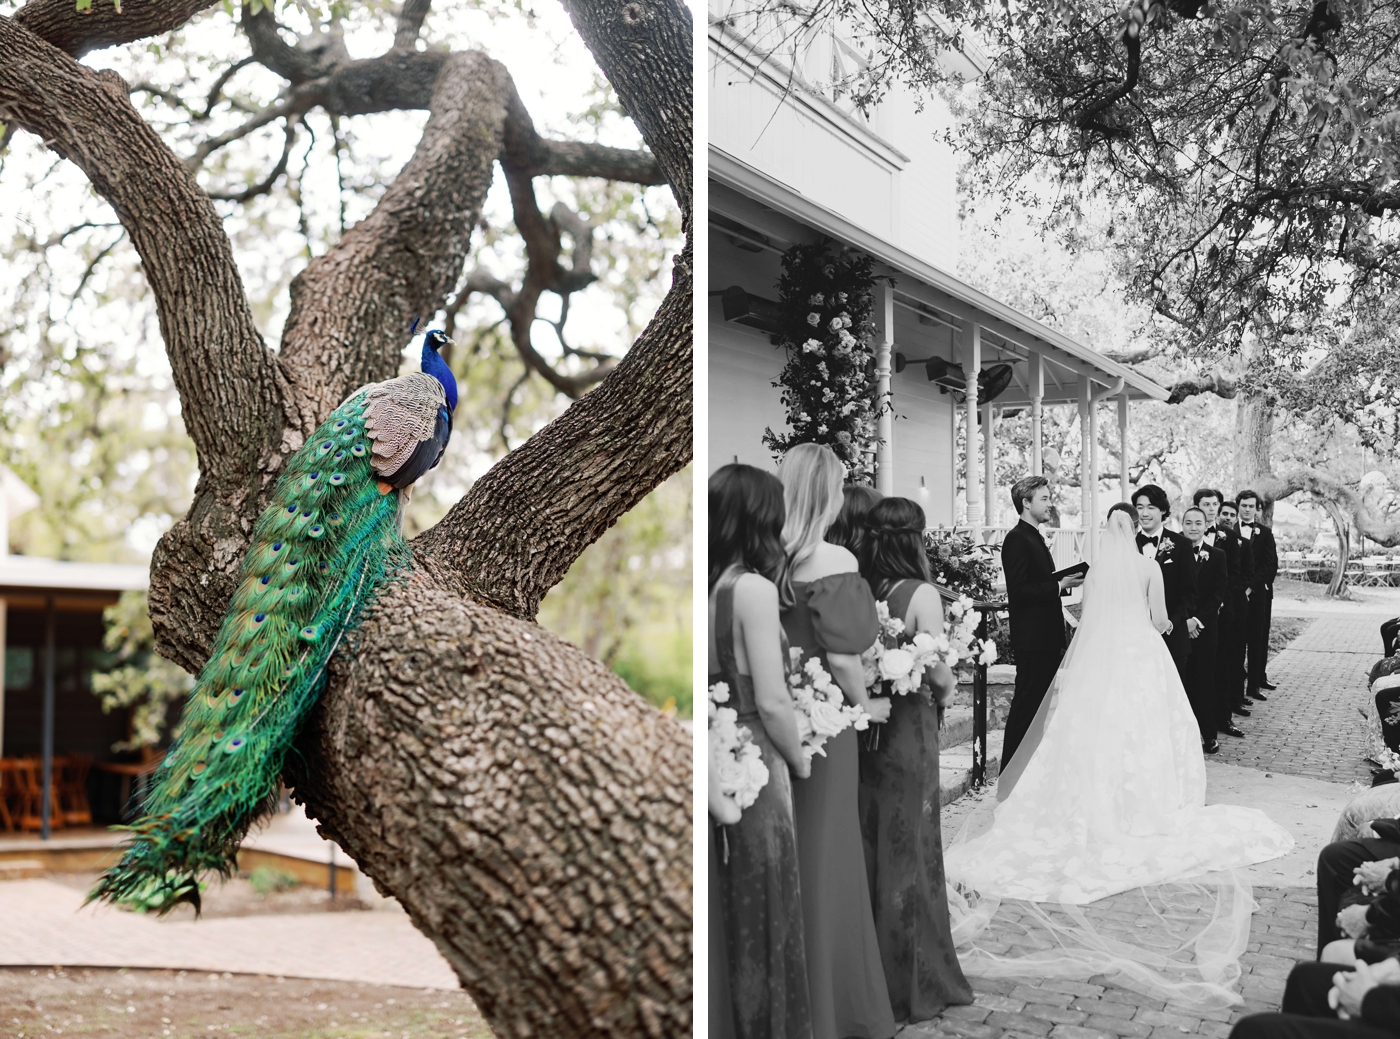 Bride and groom holding hands and exchanging vows outside, with a peacock next to them